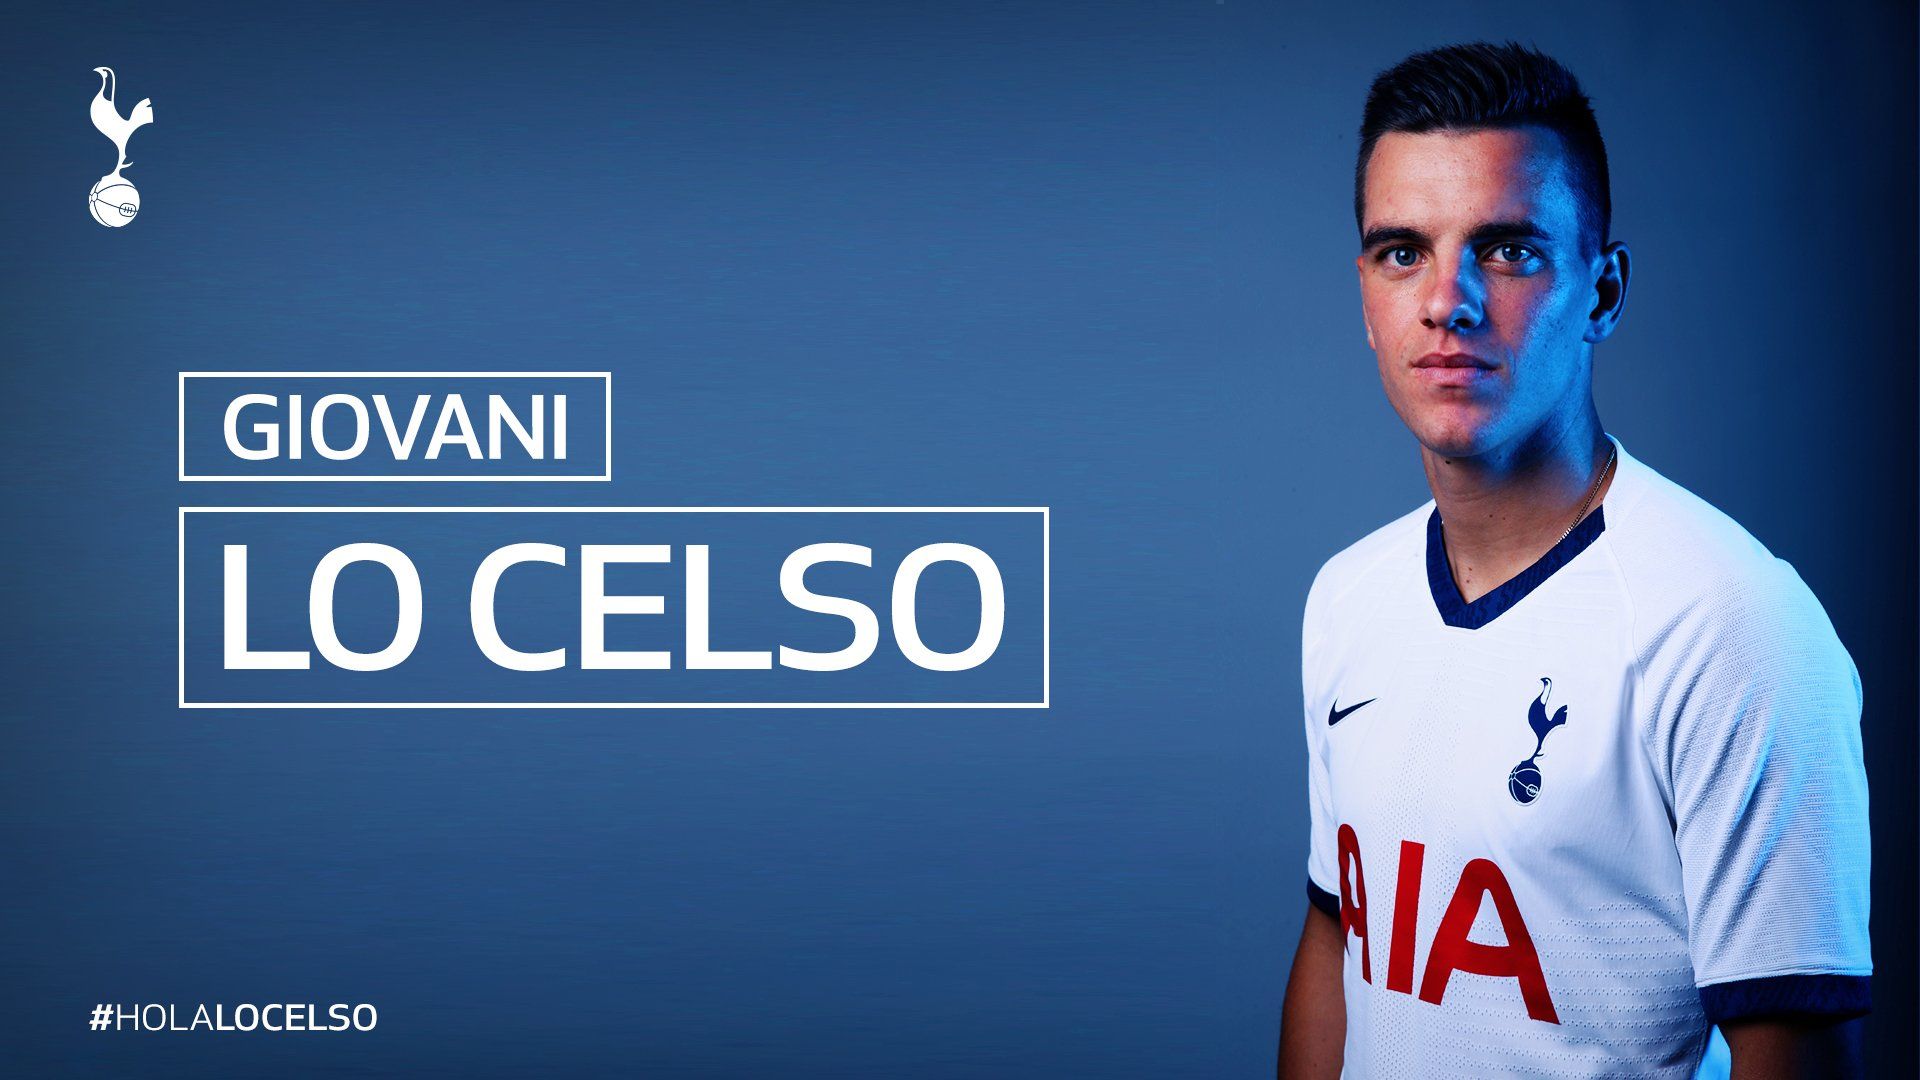 Tottenham Hotspur's time to say #HolaLoCelso!